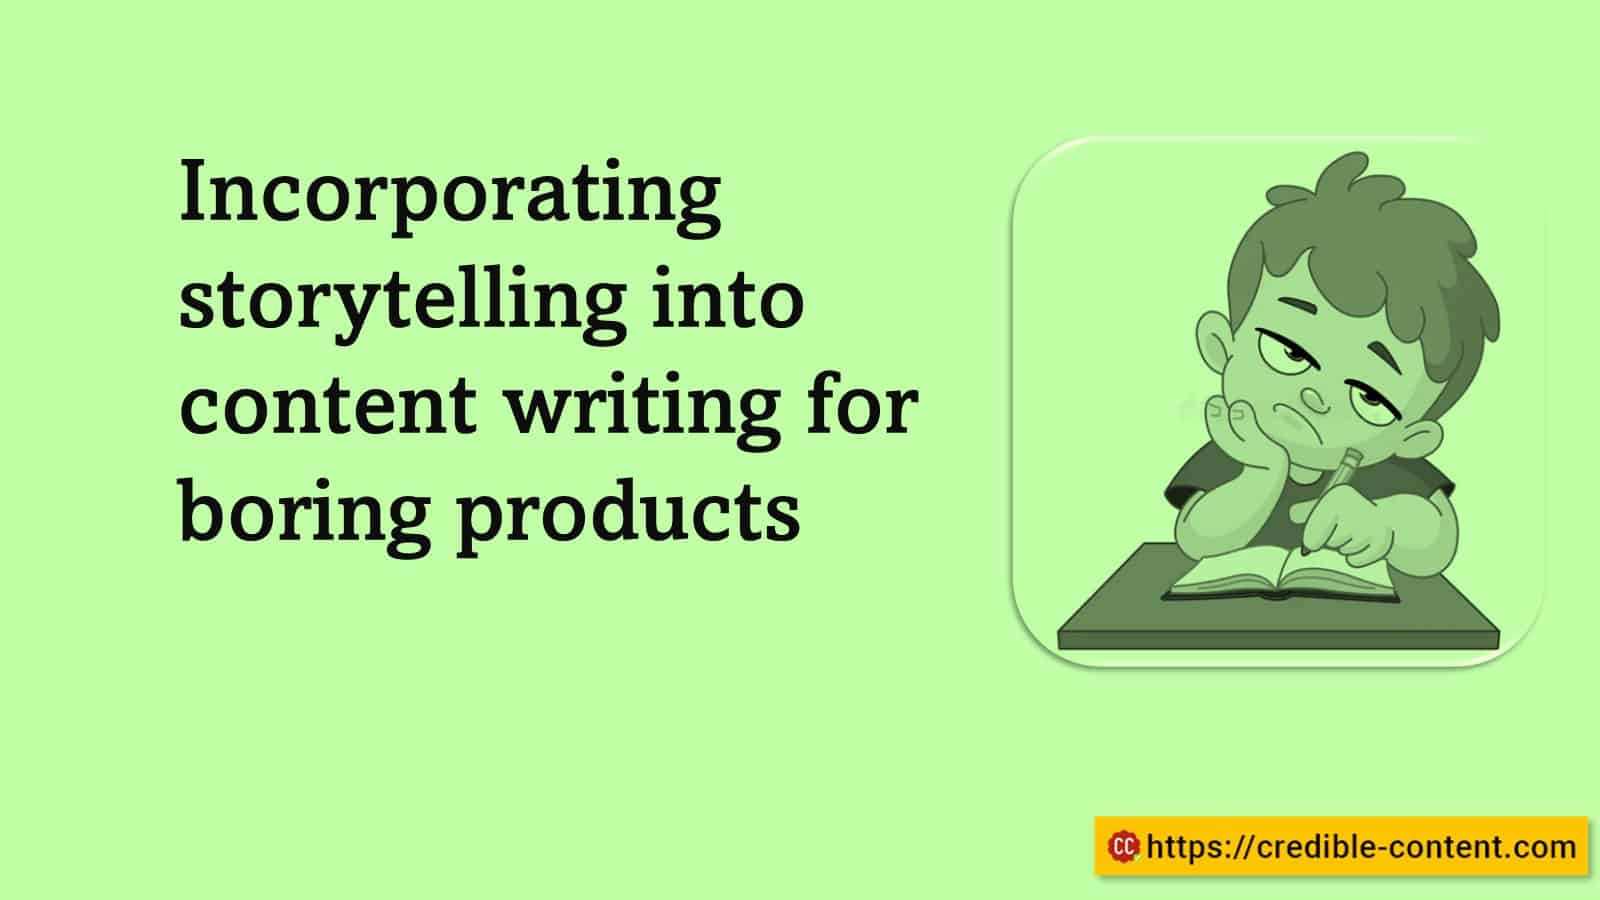 Incorporating storytelling into content writing for boring products